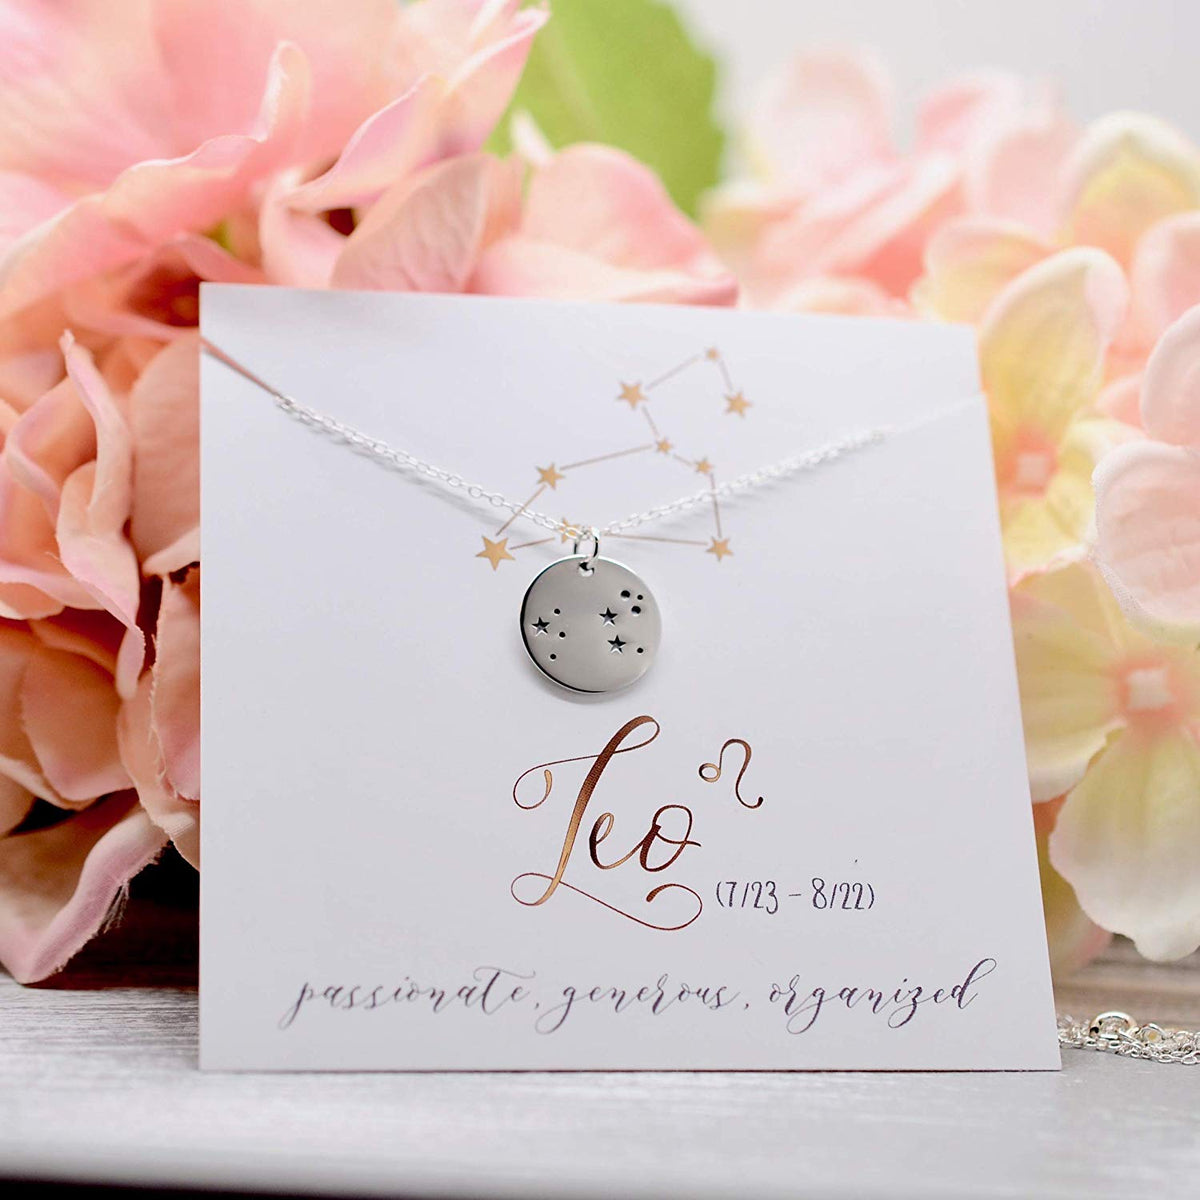 Leo Zodiac Sign Sterling Silver Constellation Necklace - Love It Personalized